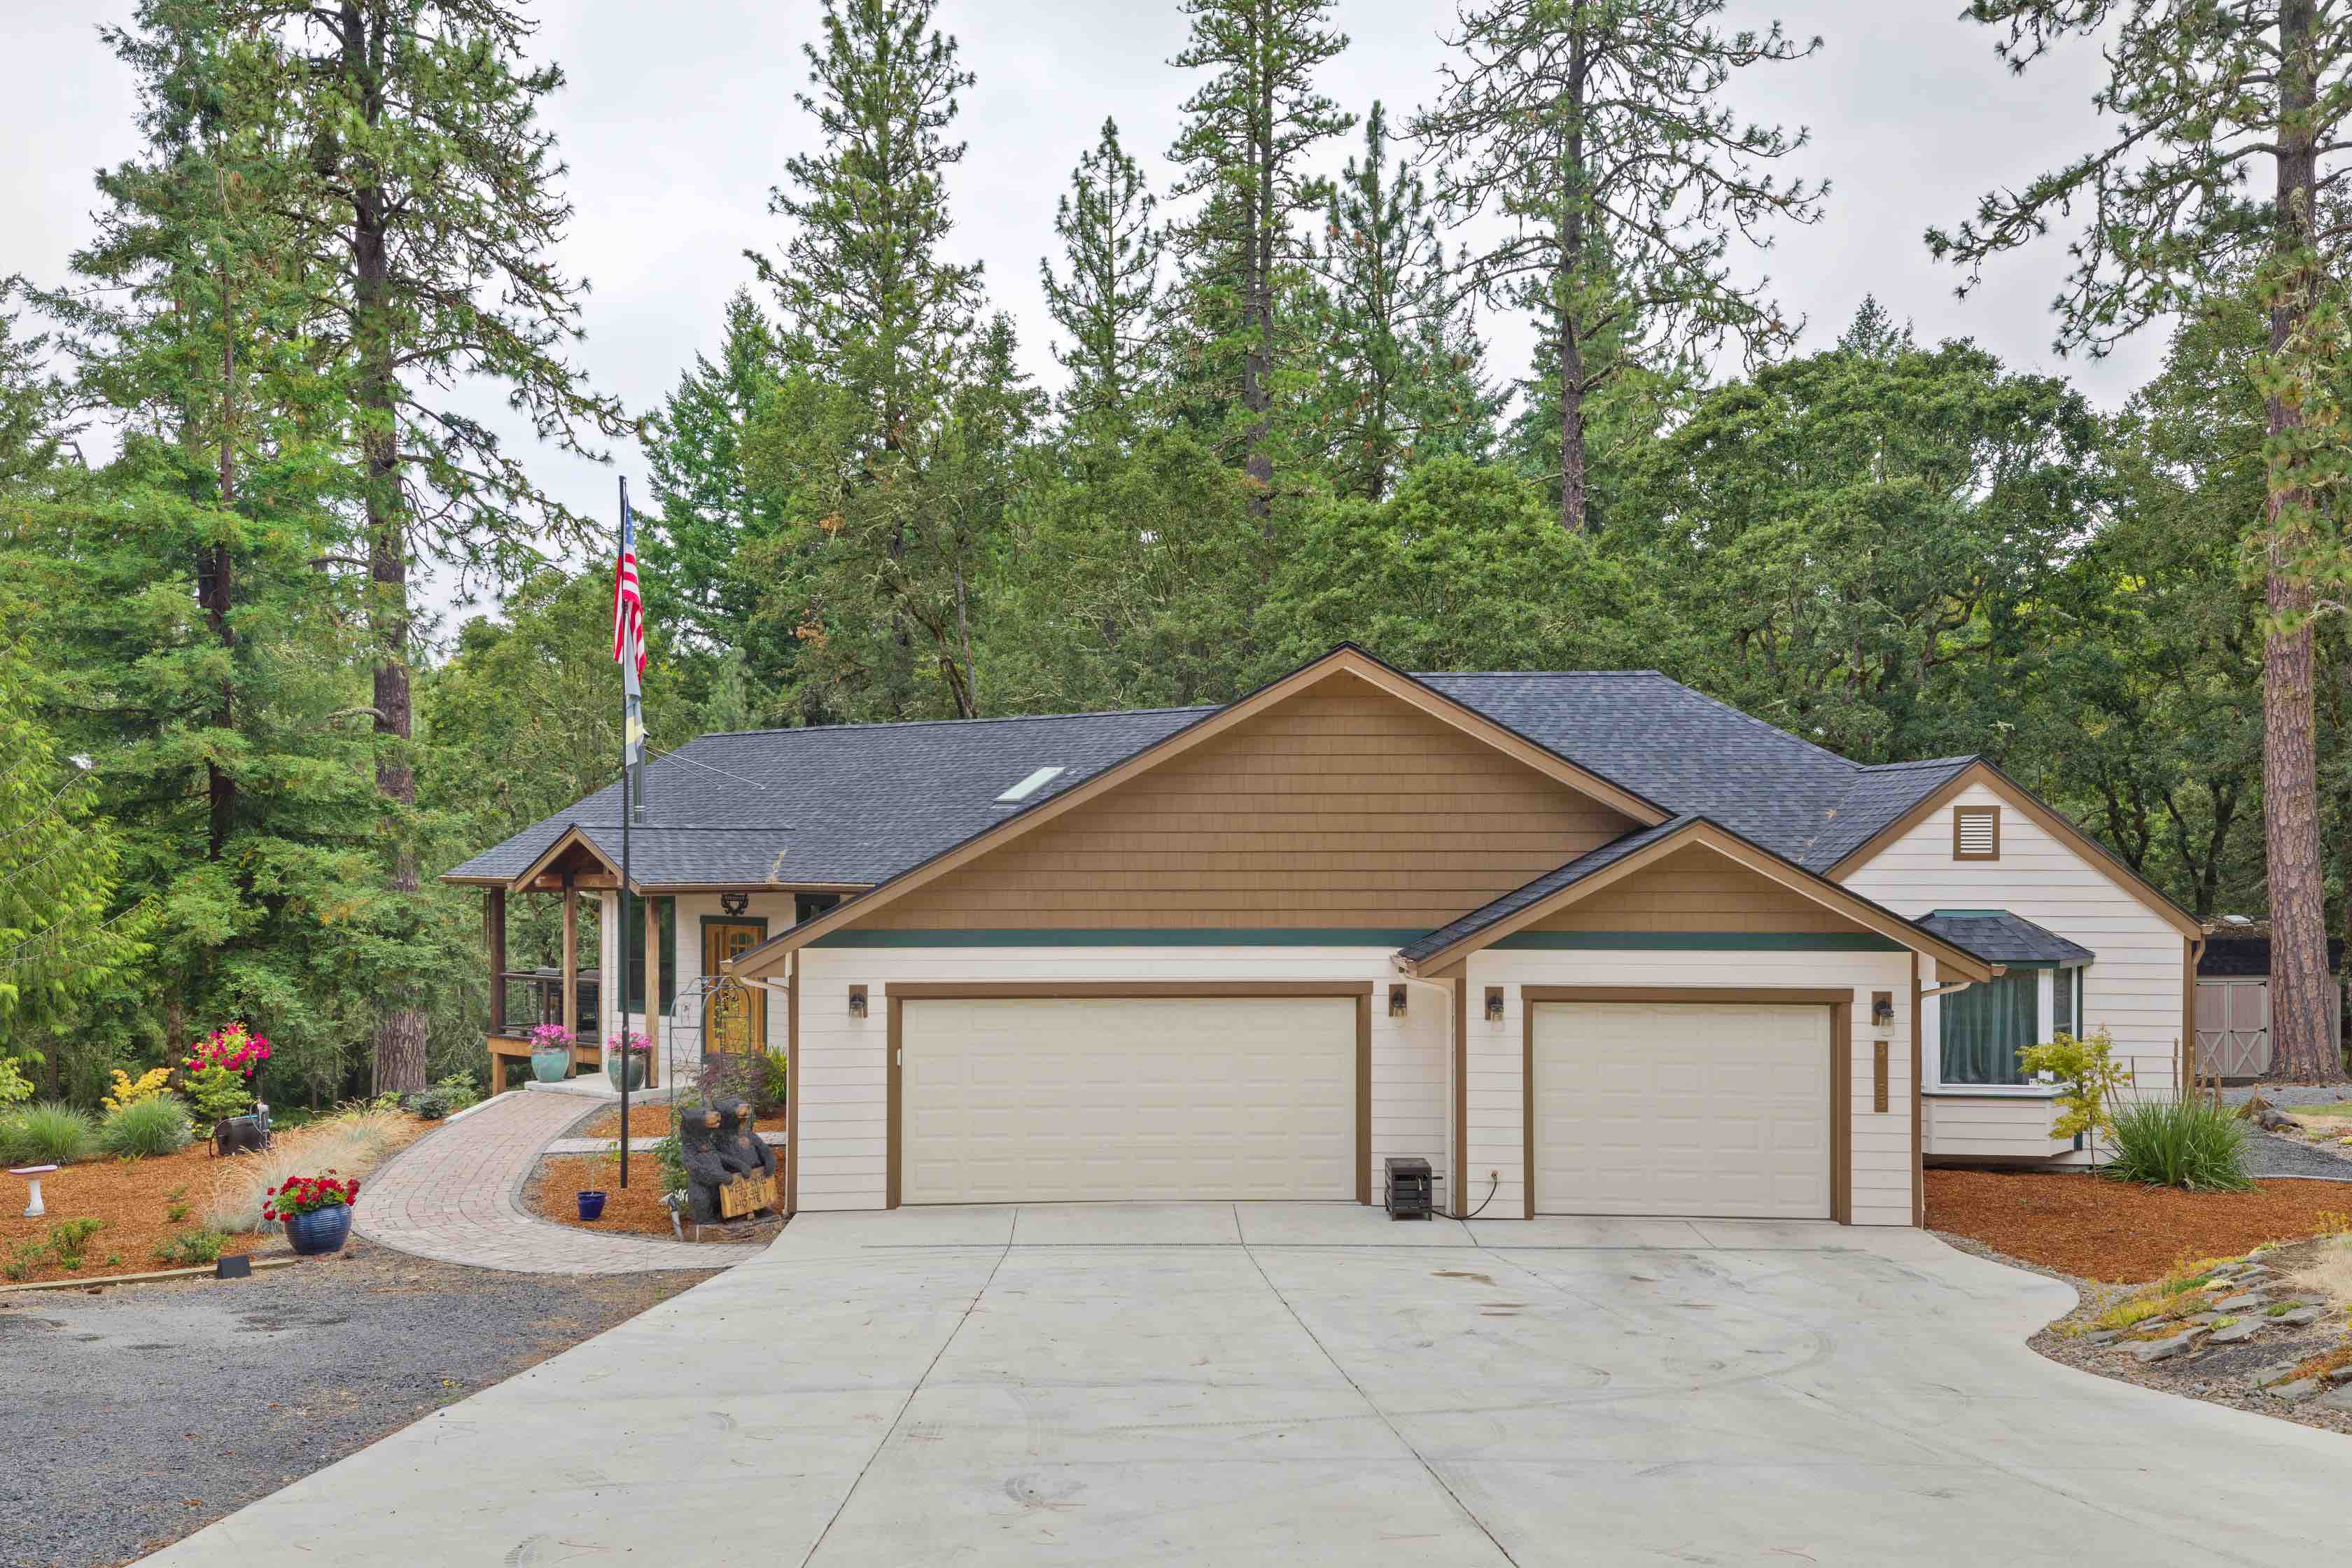 What You Need to Know About Building an Addition in Corvallis, Oregon